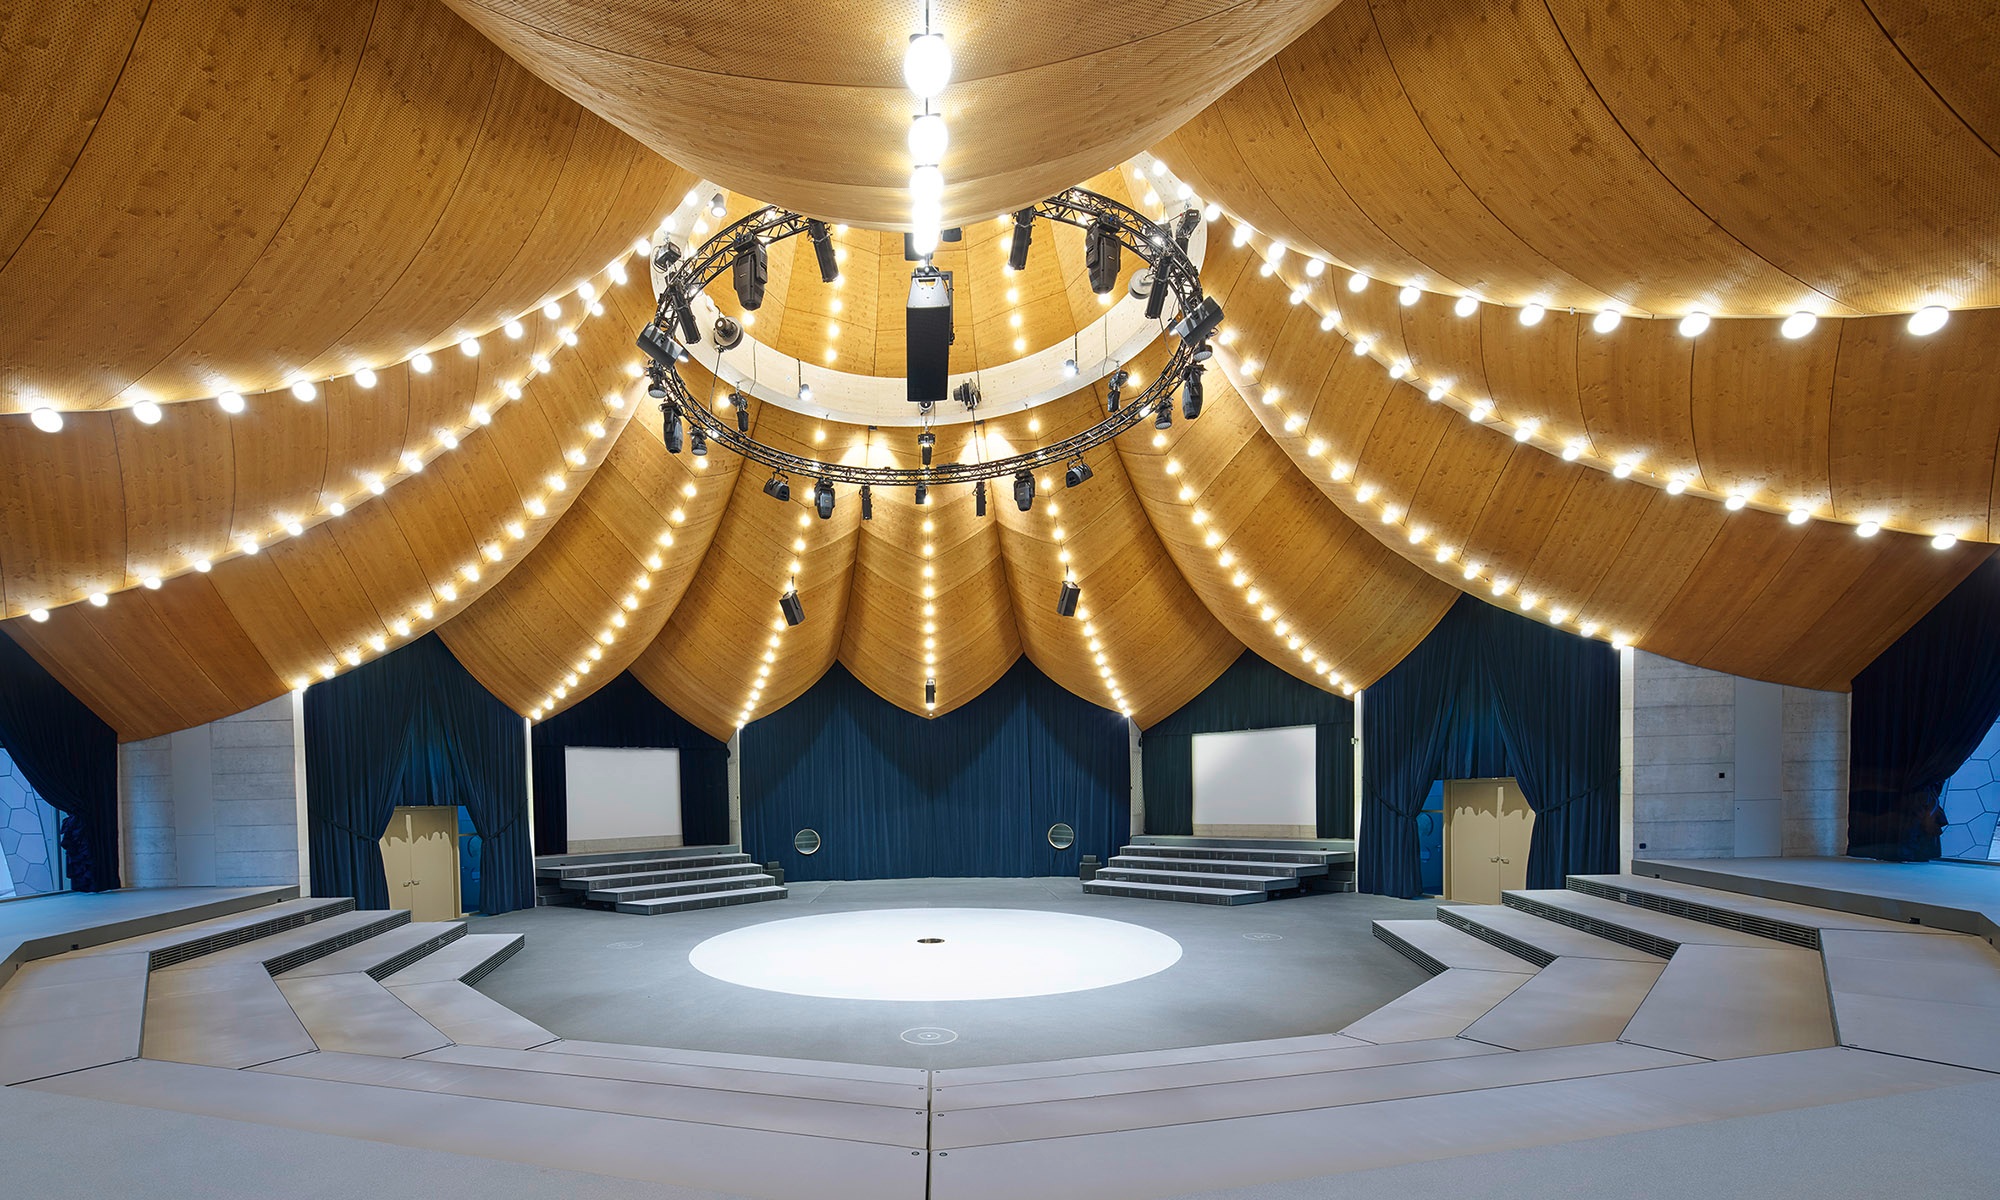 The curved timber creates a circus-like atmosphere inside the magician’s hat. 